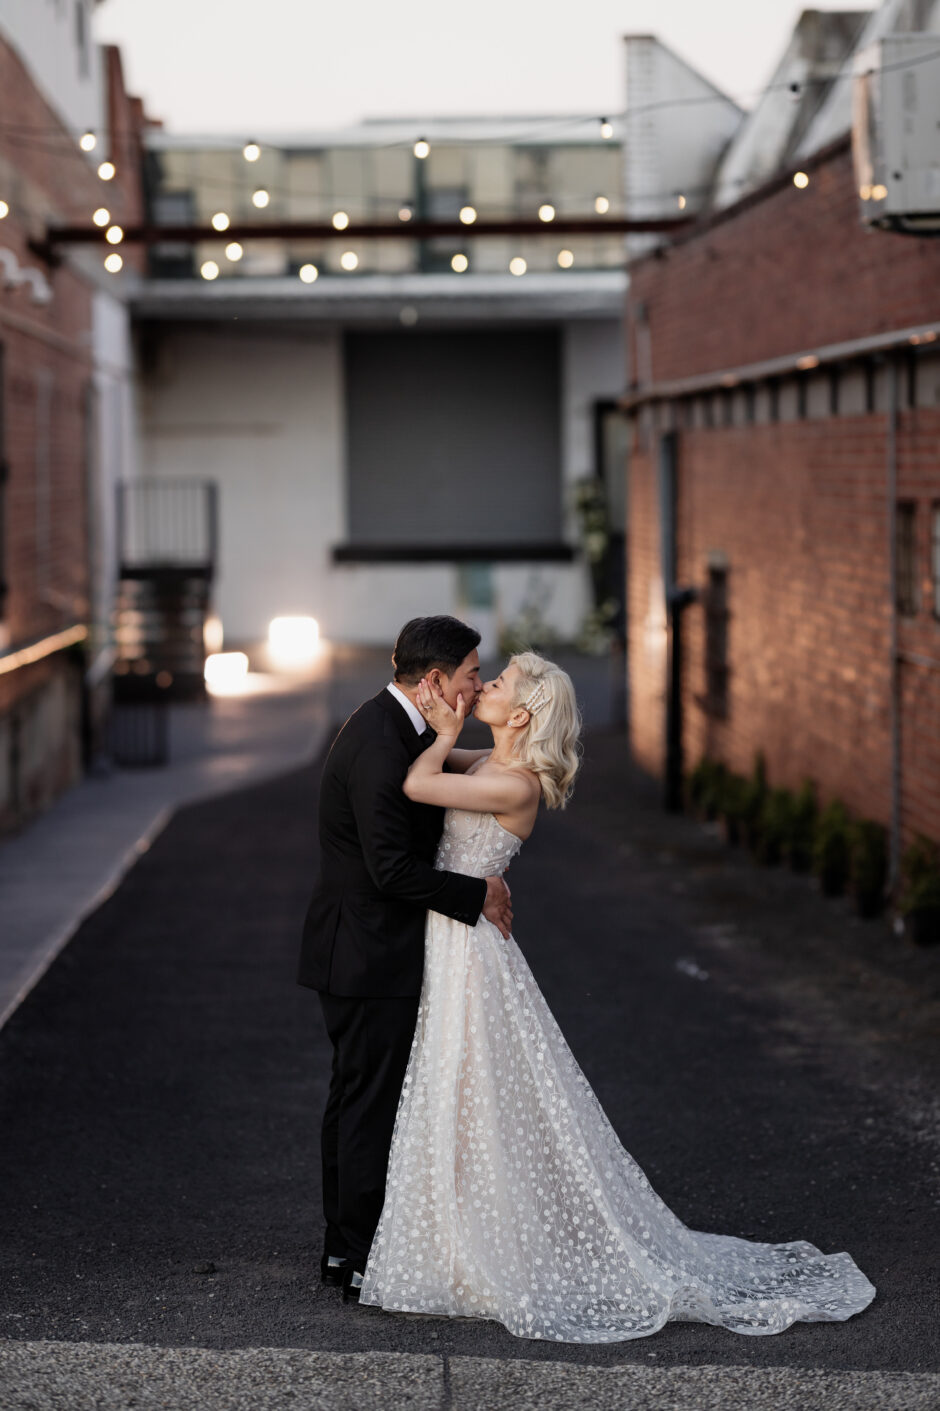 Whitney & Tan || 27-11-21 || The Wool Mill